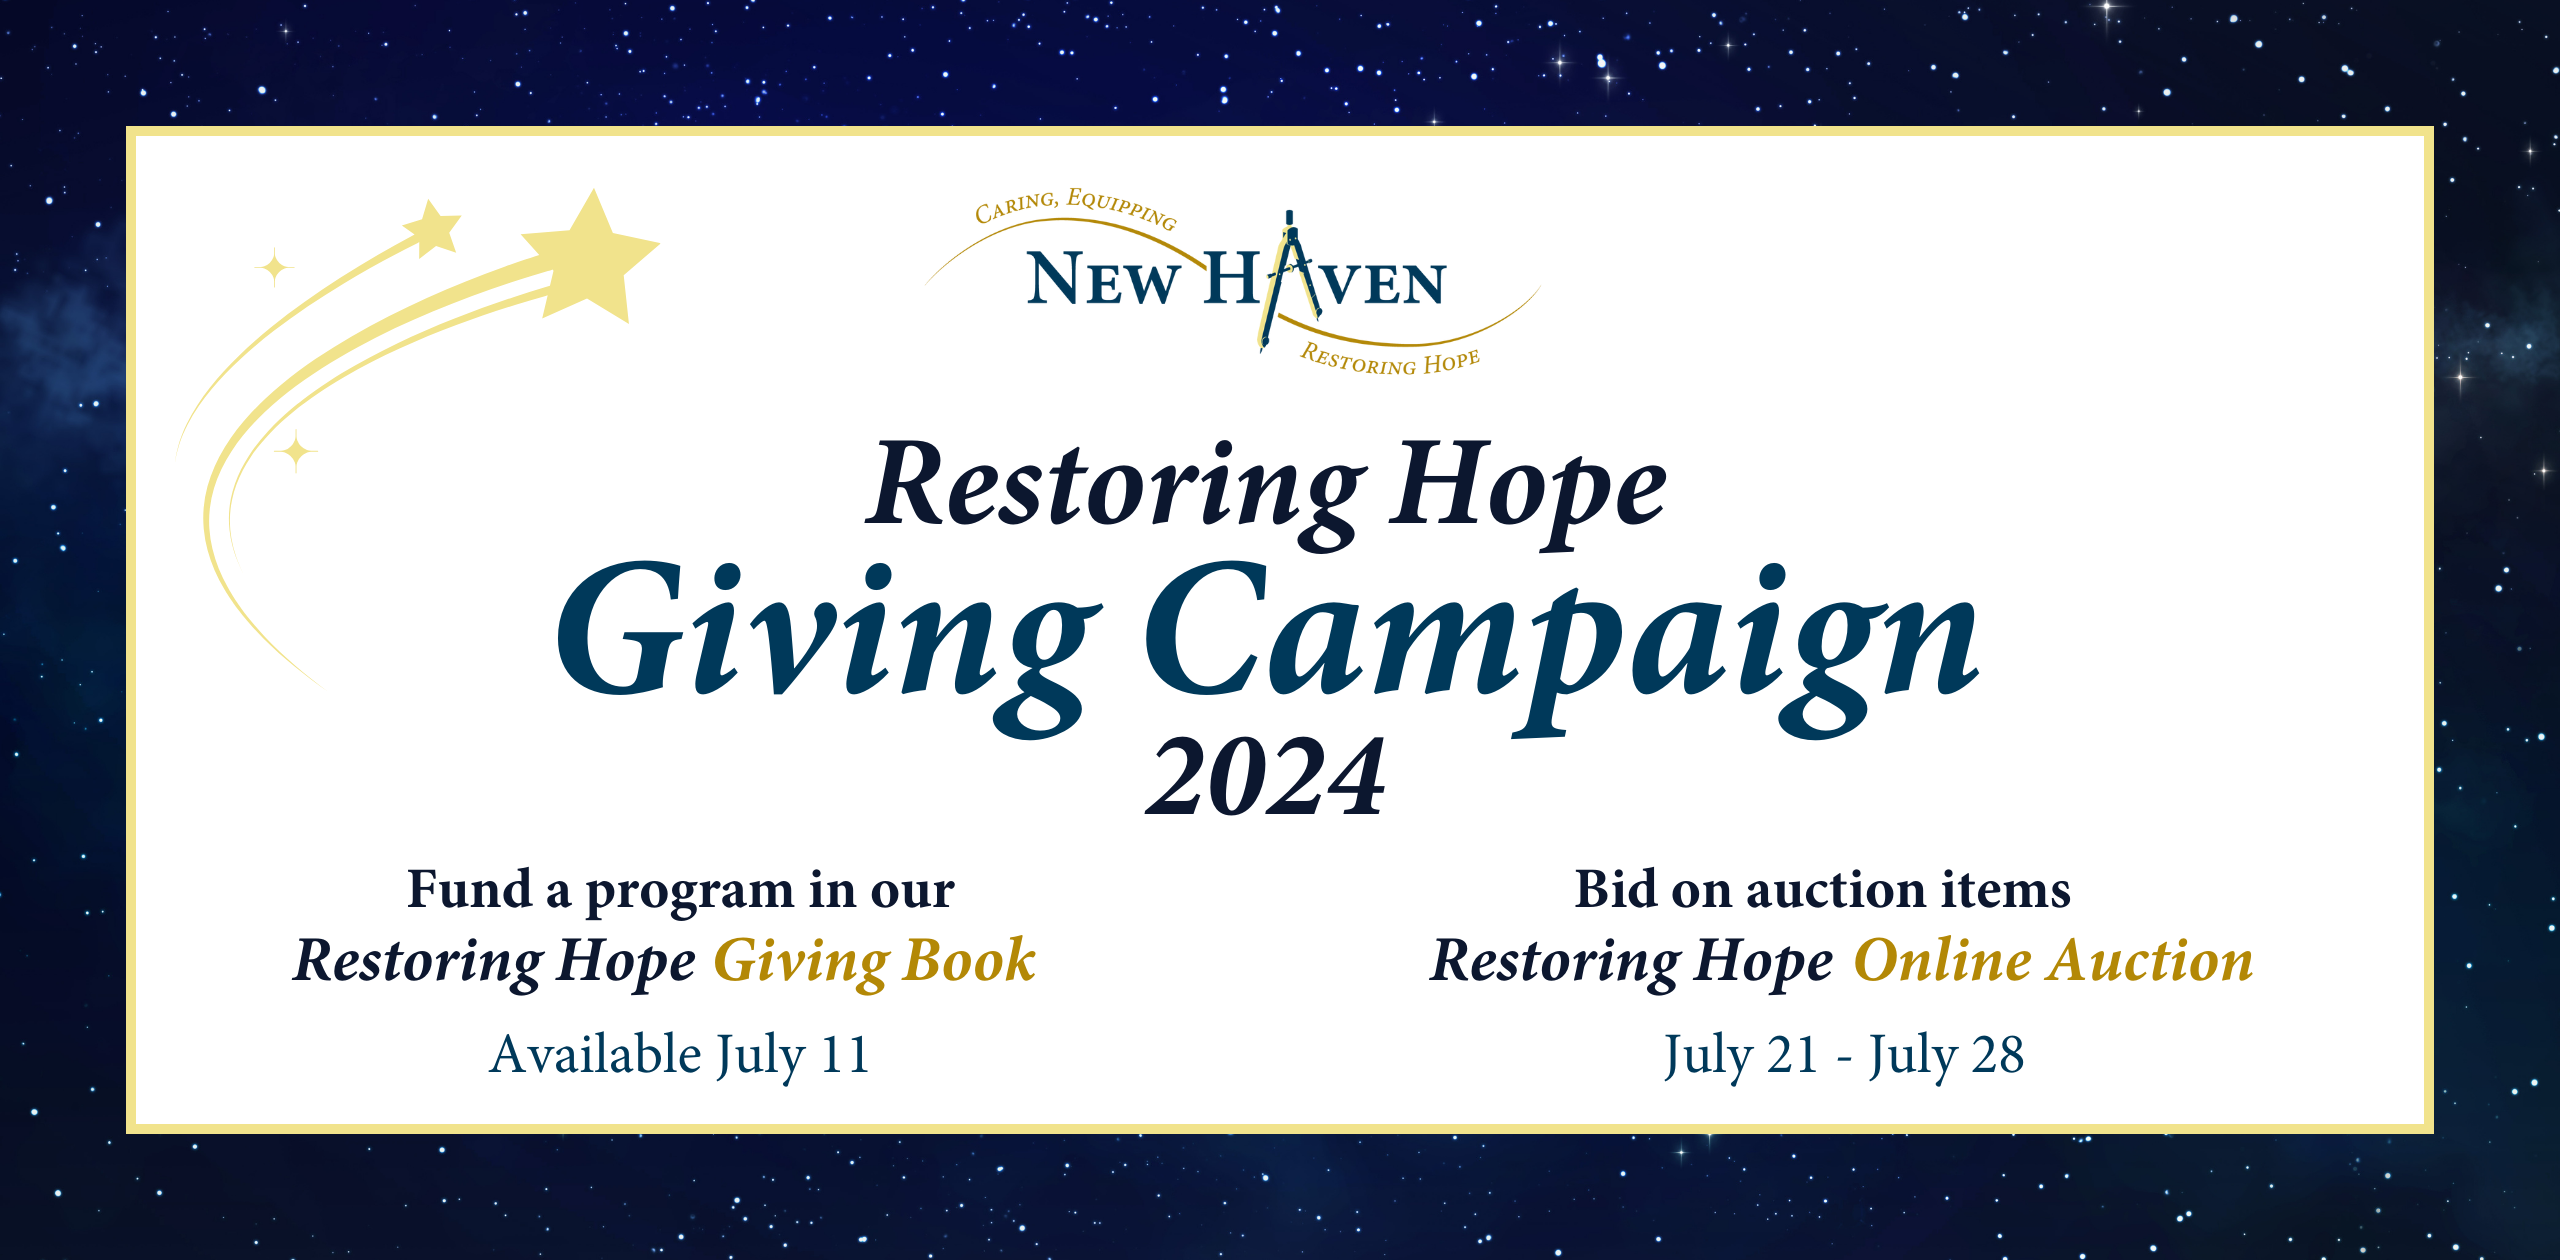 Restoring Hope Giving Campaign 2024